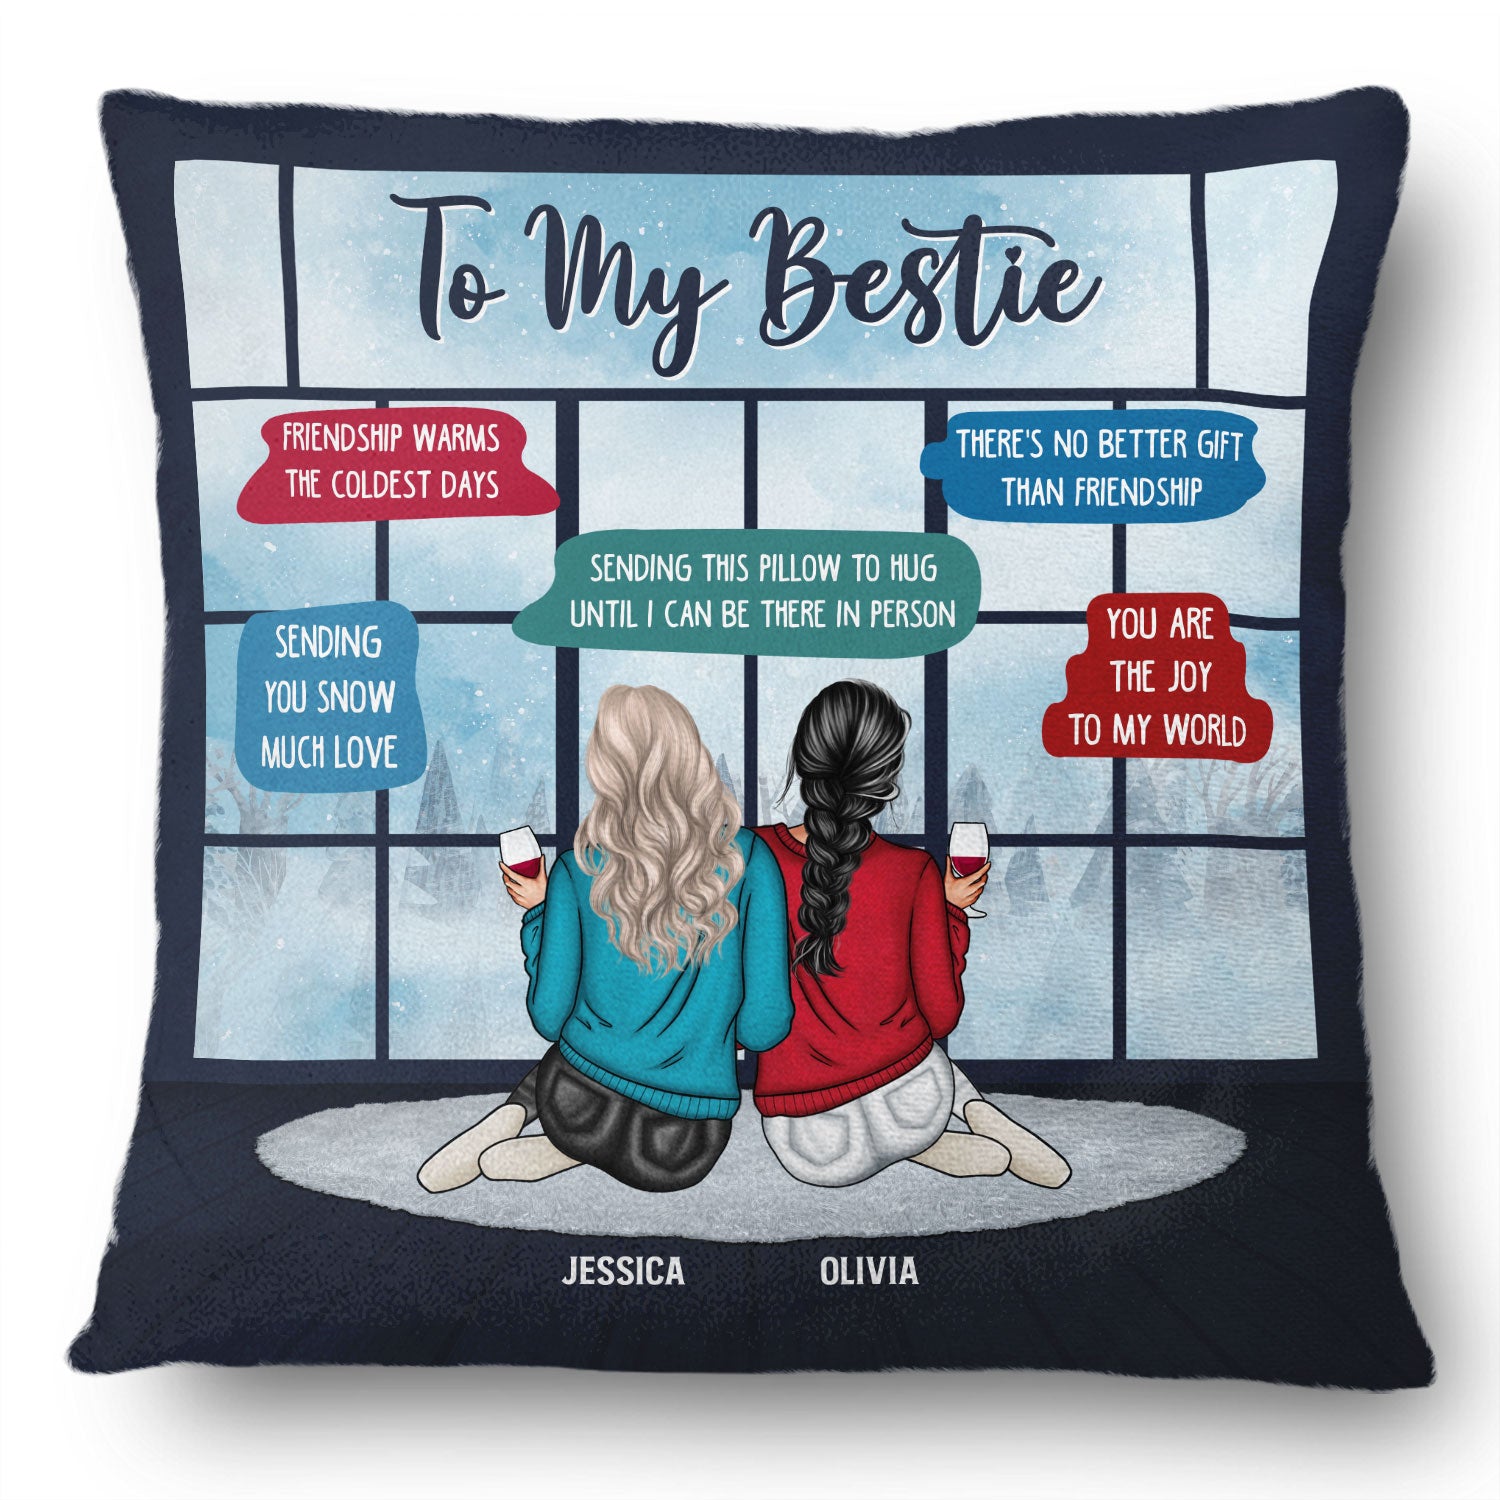 Friendship Warms The Coldest Days - Gift For Besties - Personalized Pillow